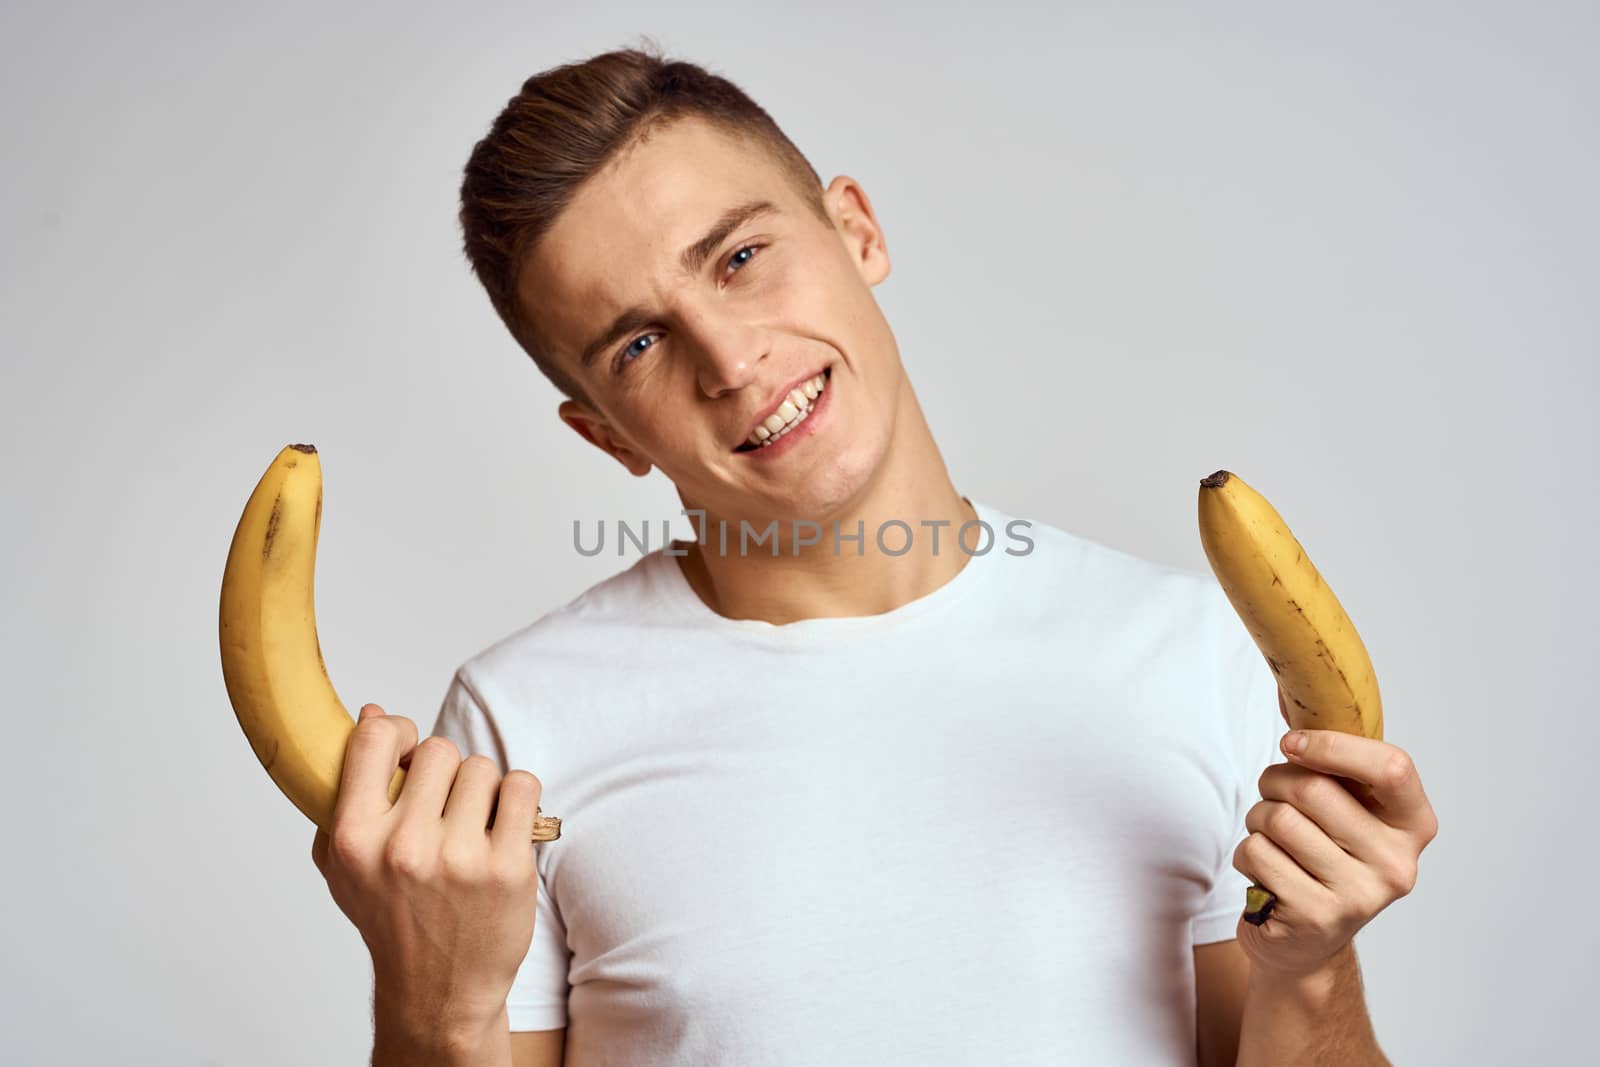 guy with a banana in his hand on a light background fun emotions light background white t-shirt model. High quality photo